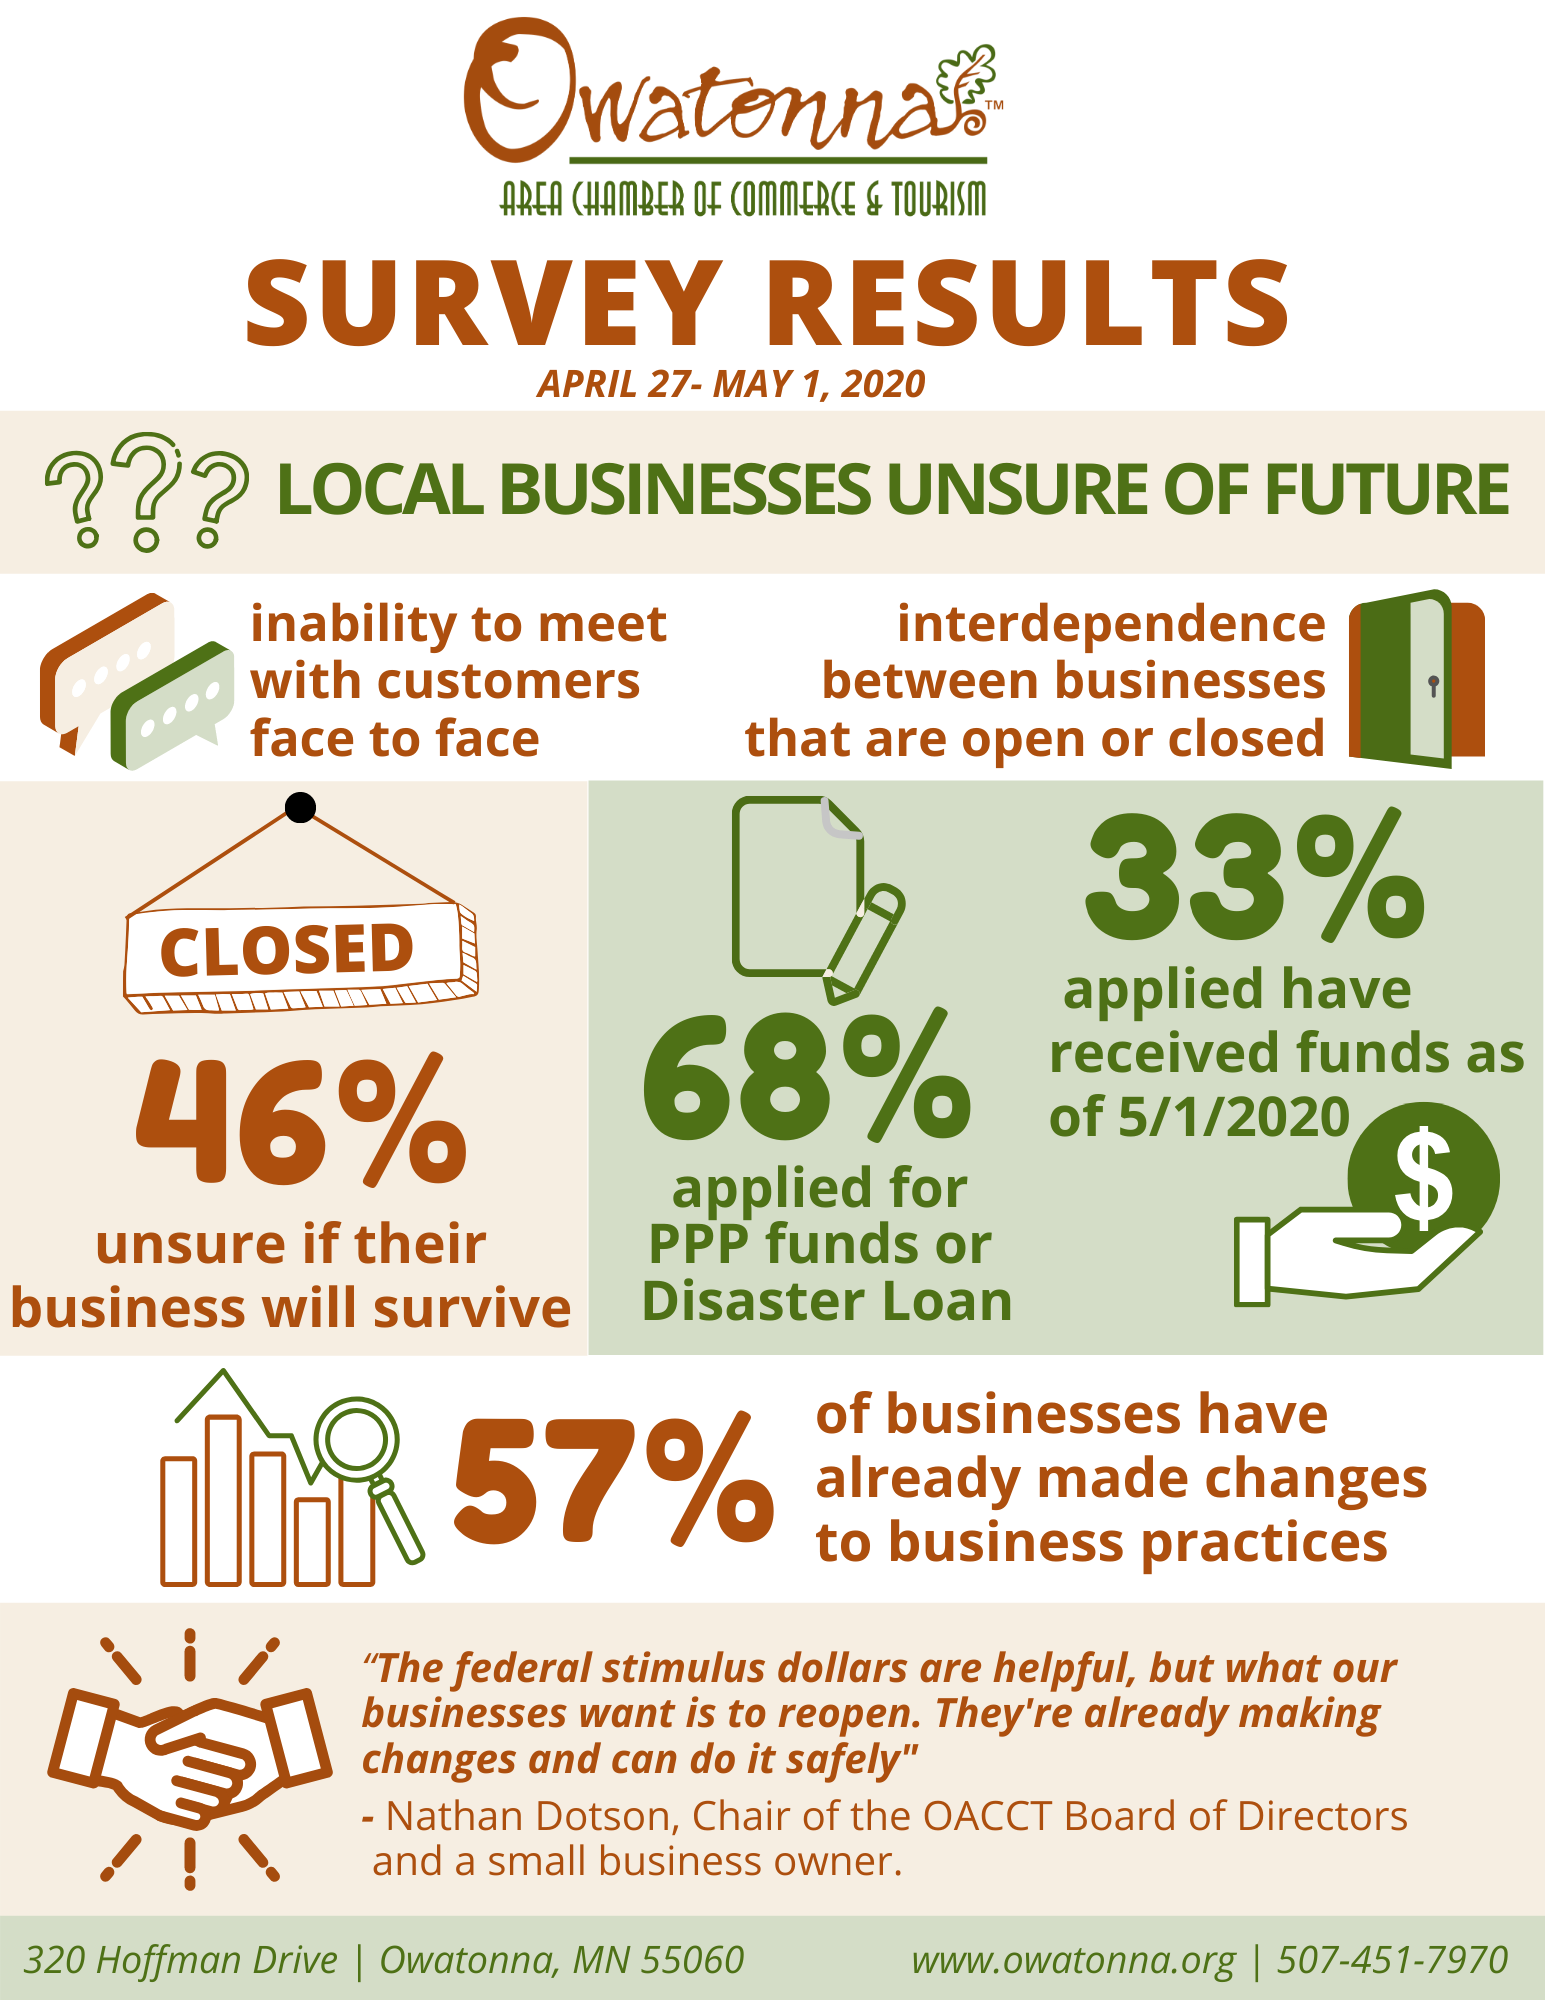 Needs Assessment Shows Uncertainty for Small Business Survival